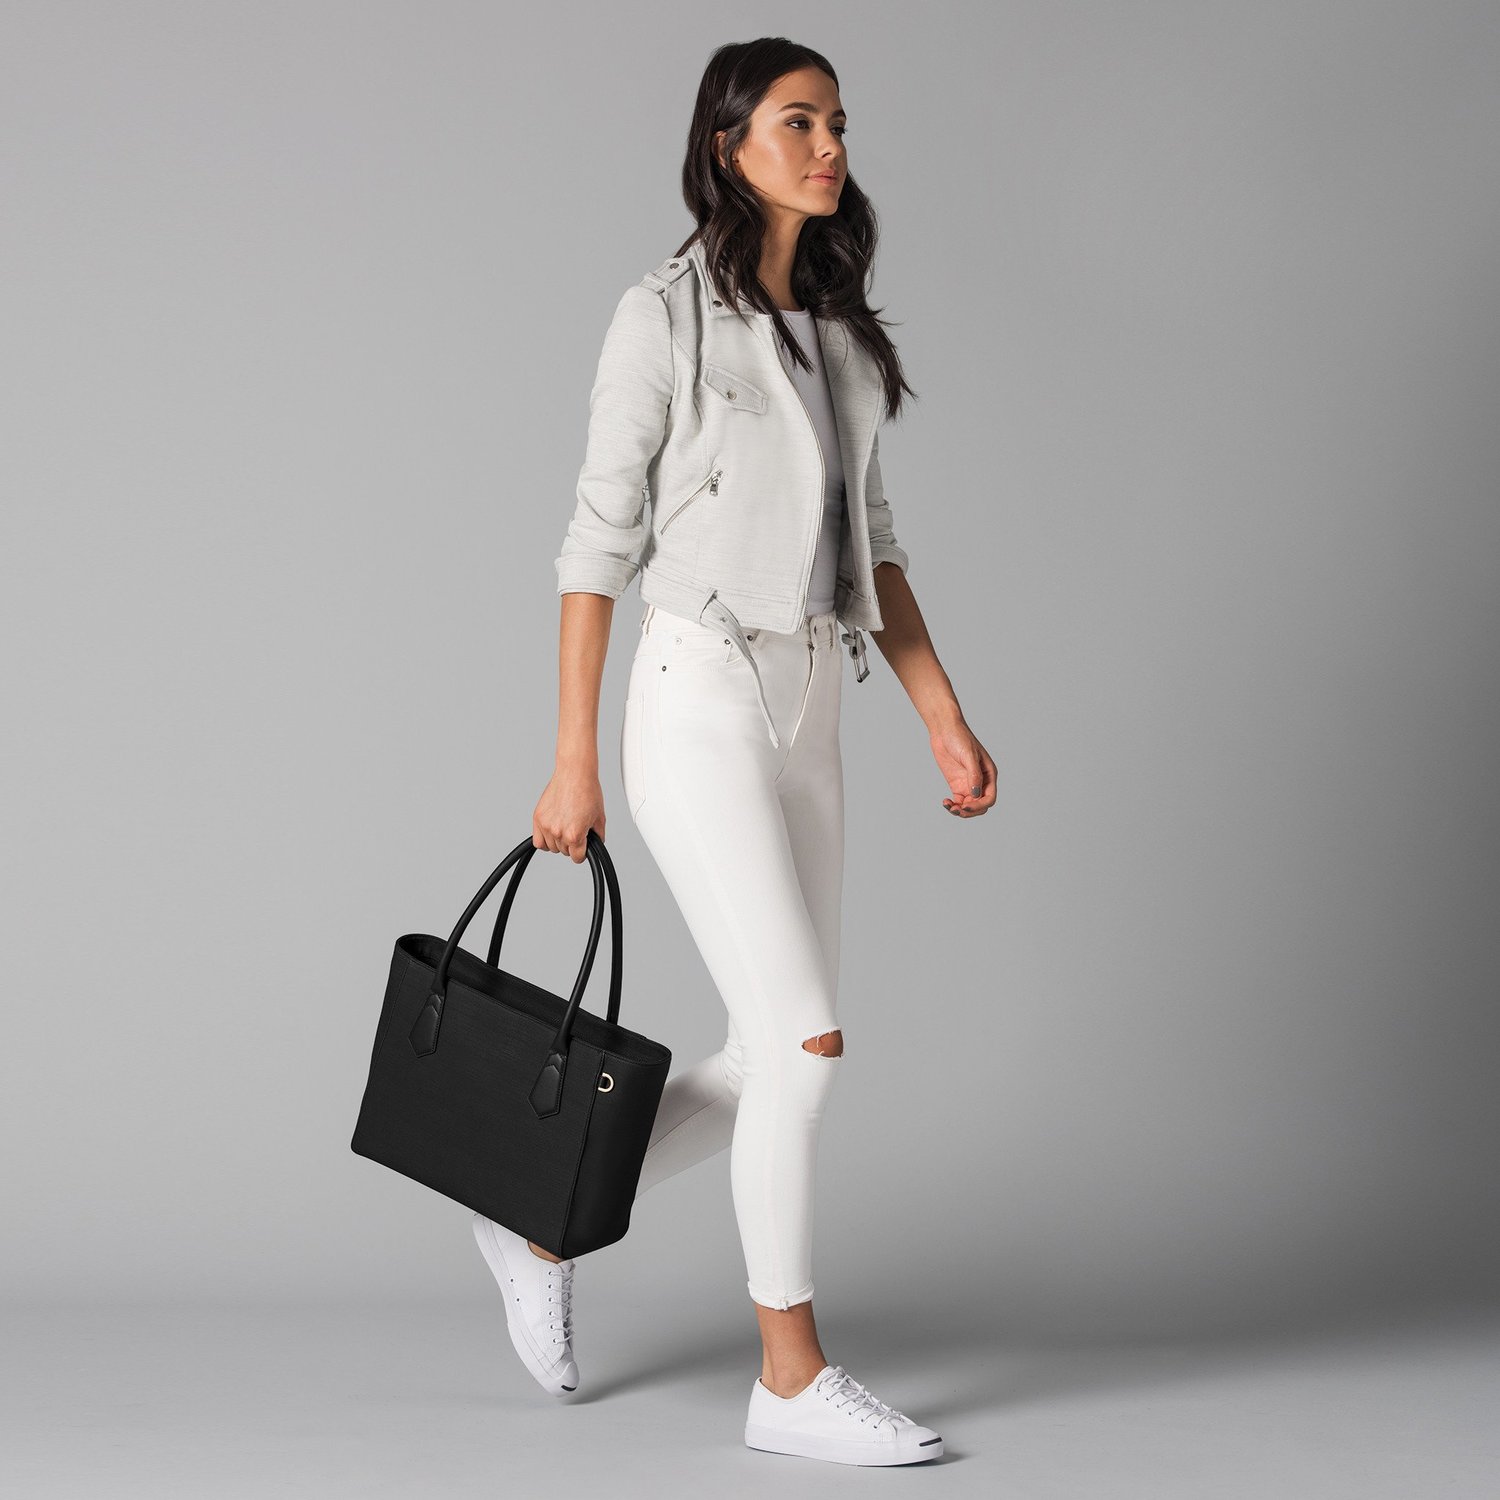 This Dagne Dover Tote Is The Perfect Fall Bag—And It's 40% Off Right Now -  Forbes Vetted